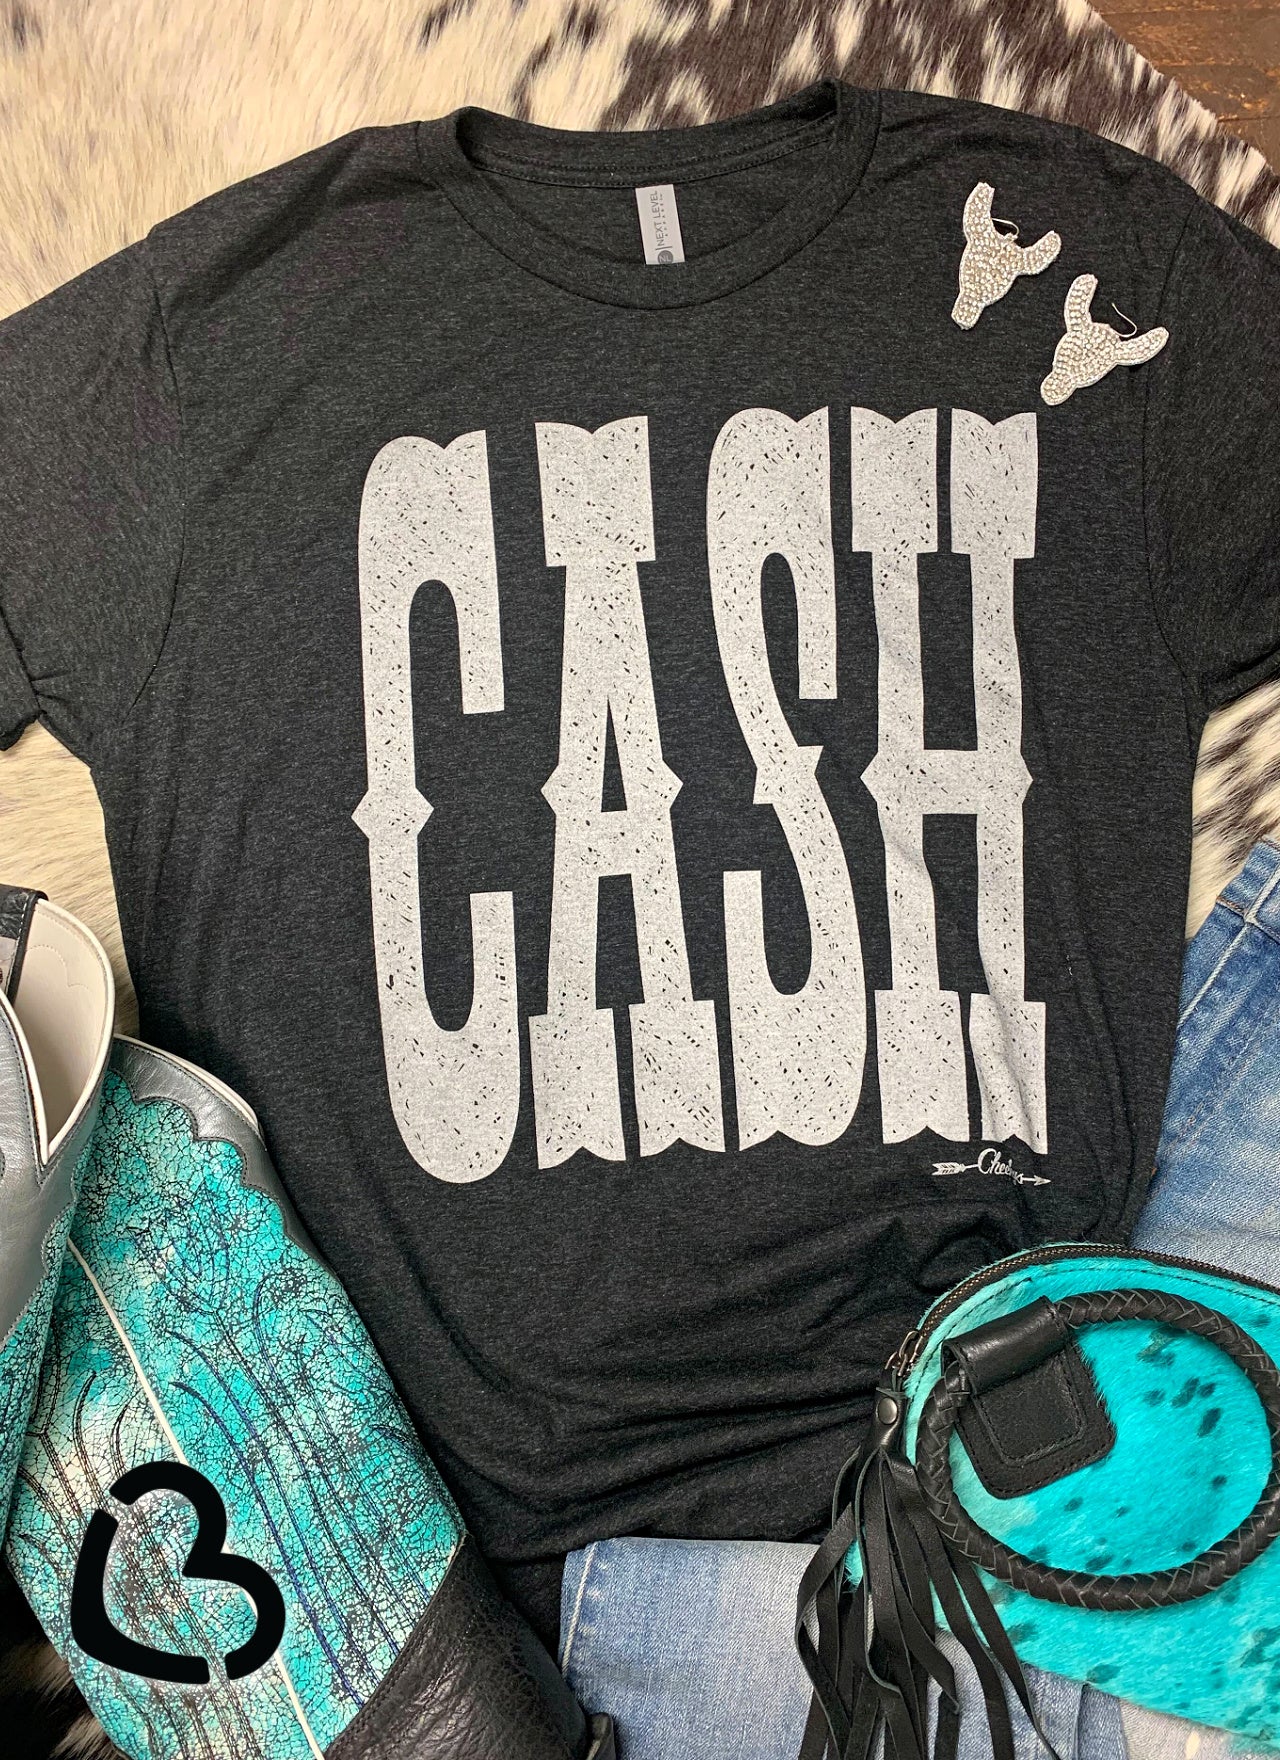 Cash Unisex Tee in Vintage Black with Shimmer Print Cheekys Apparel 38 